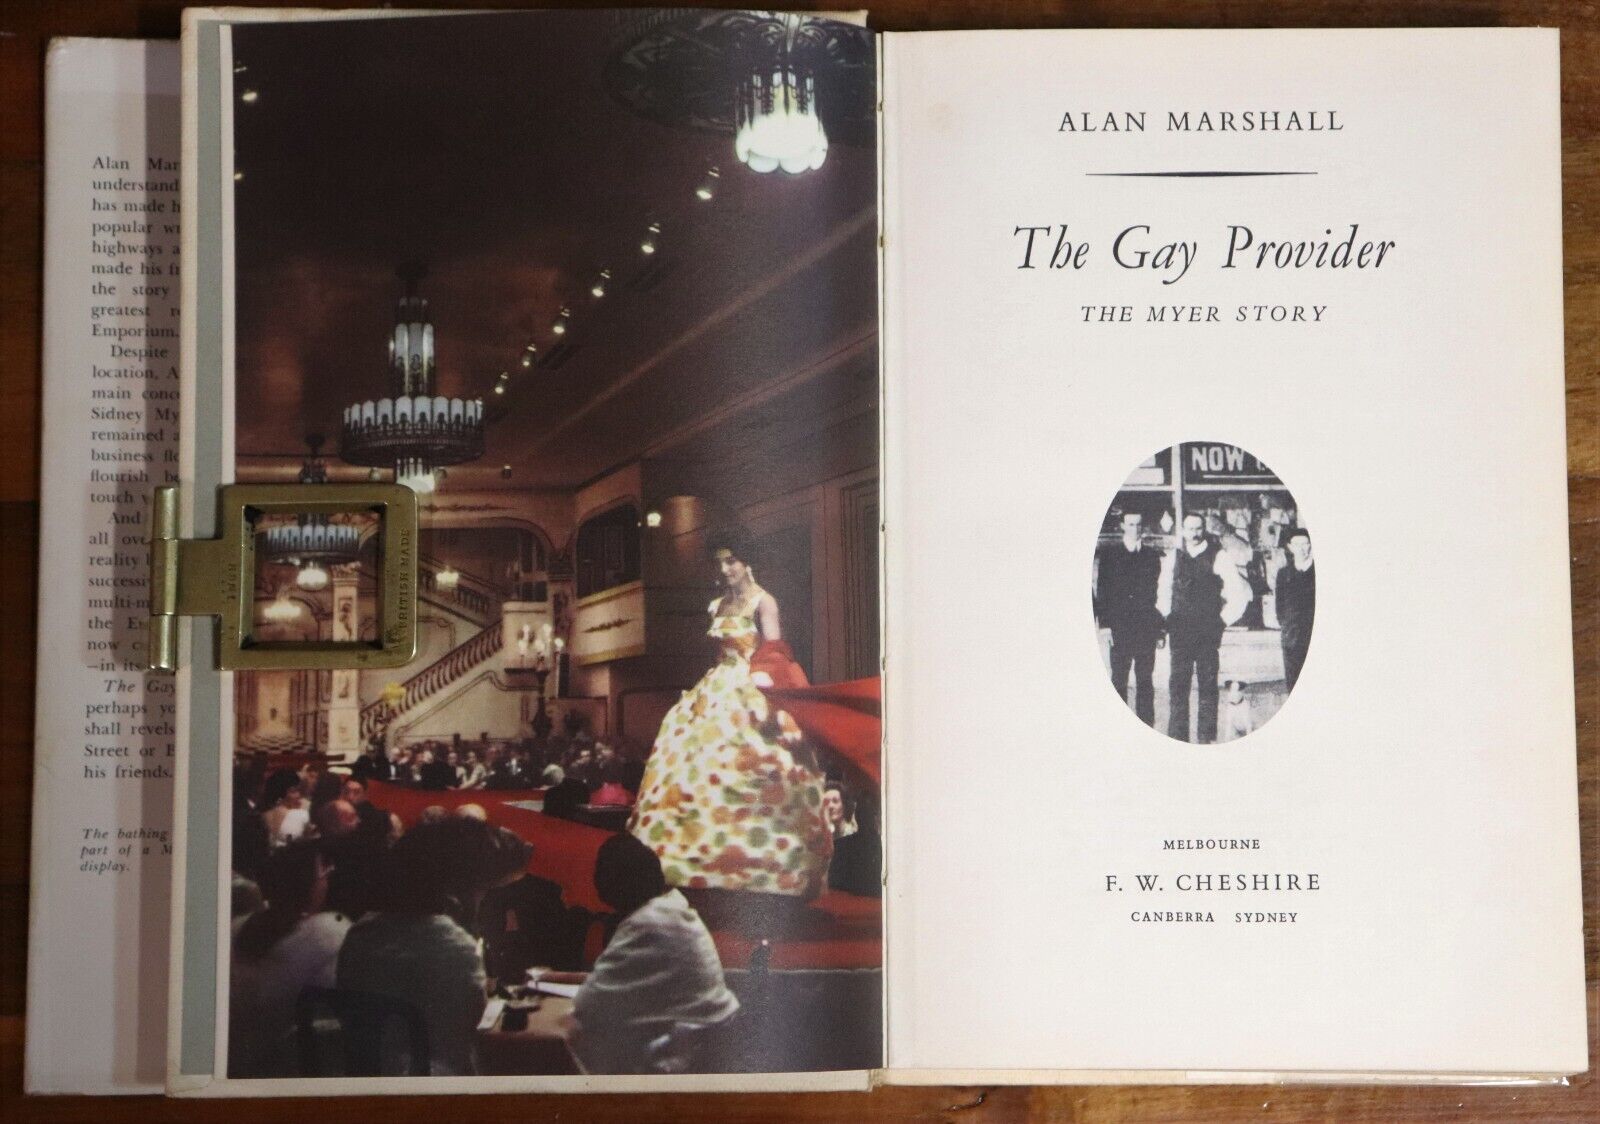 The Gay Provider: The Myer Story - 1961 - 1st Ed. Australian Retail History Book - 0